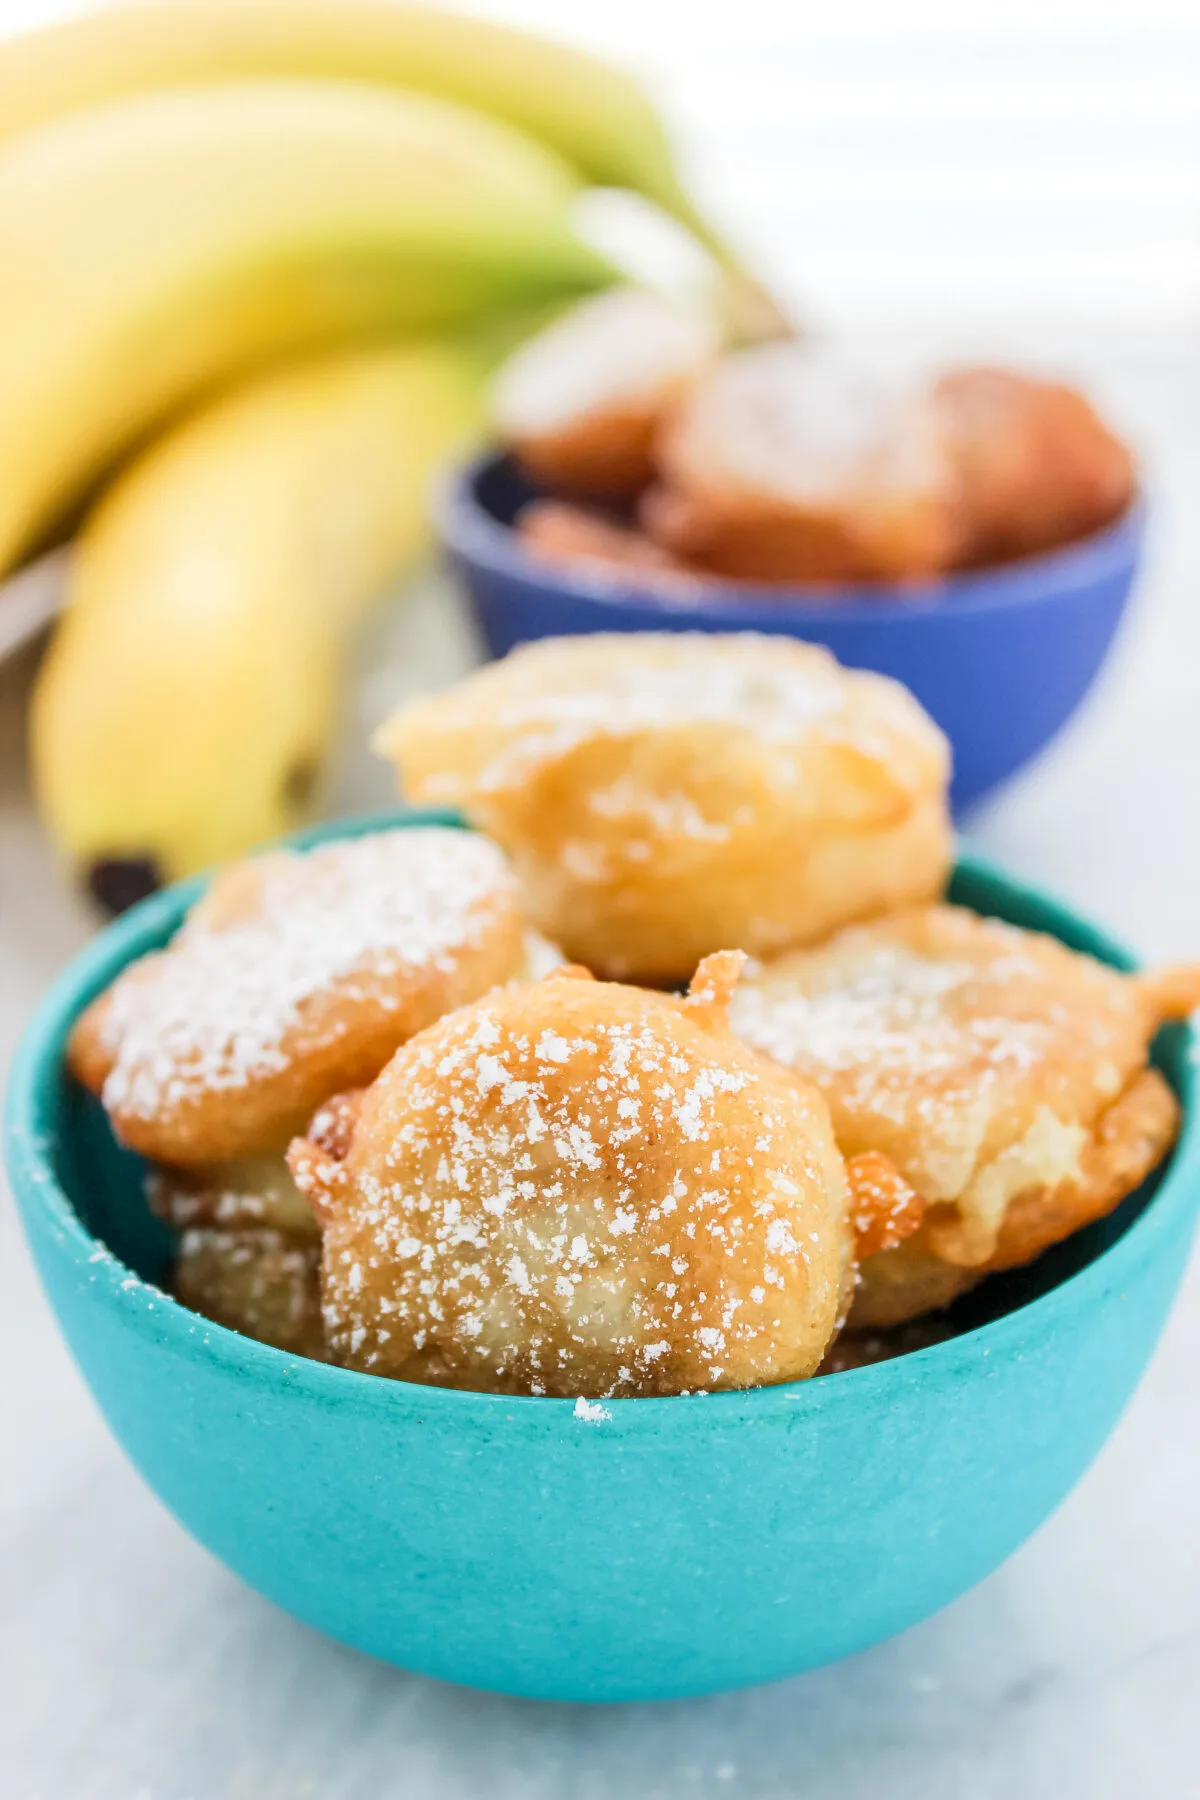 This easy fried banana bites recipe is the perfect way to use up bananas! They're delicious,and great for a quick snack or dessert.